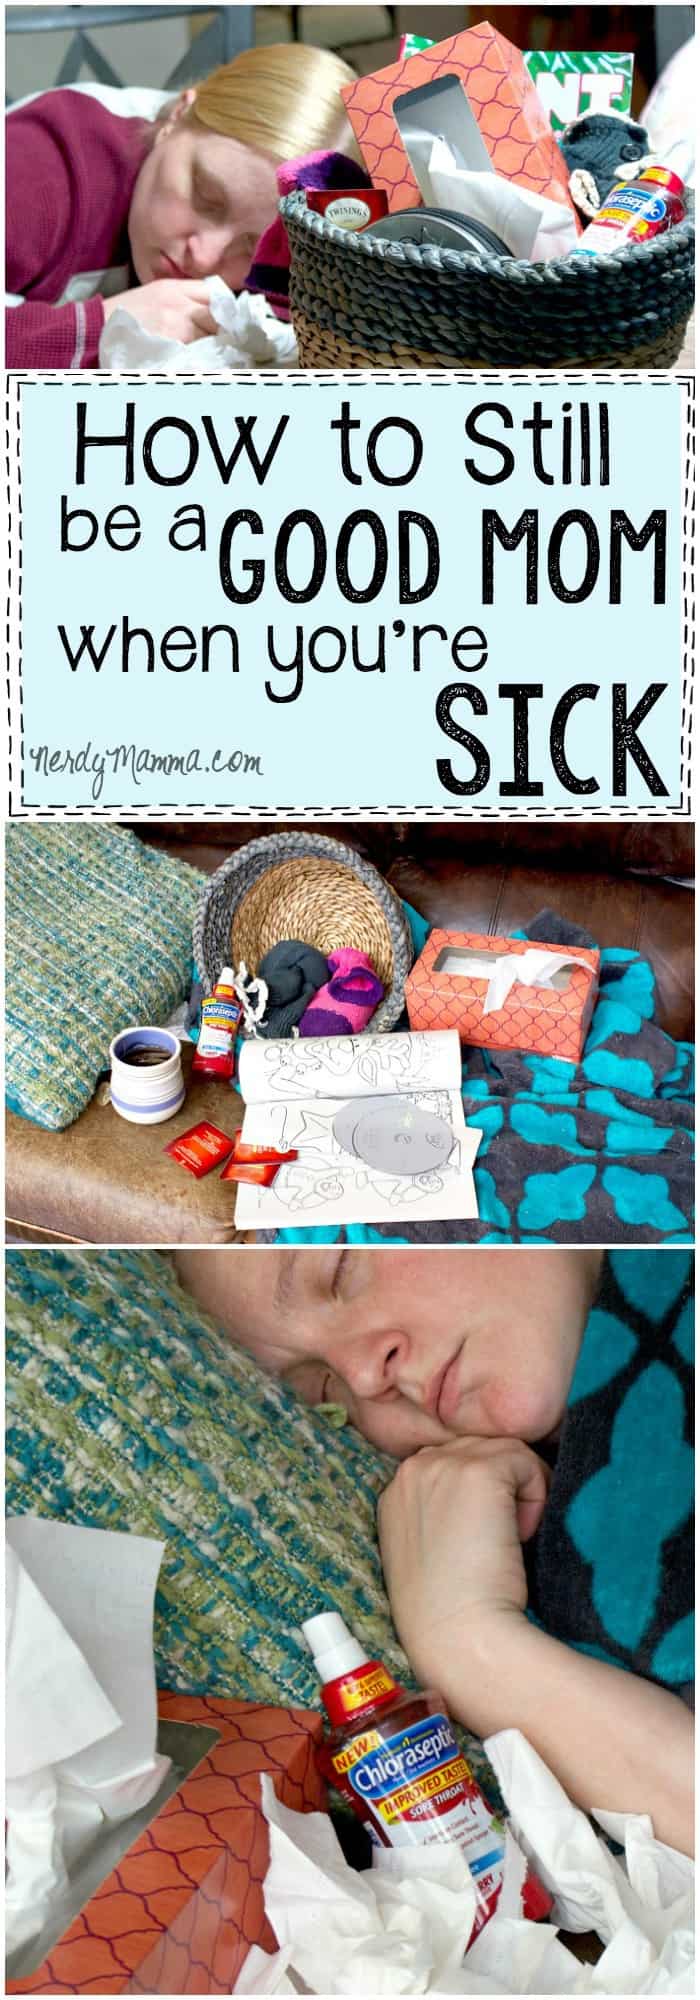 I love these tips on how to still be a good mom when you're sick! So dead-on, but also kind of funny. LOL!